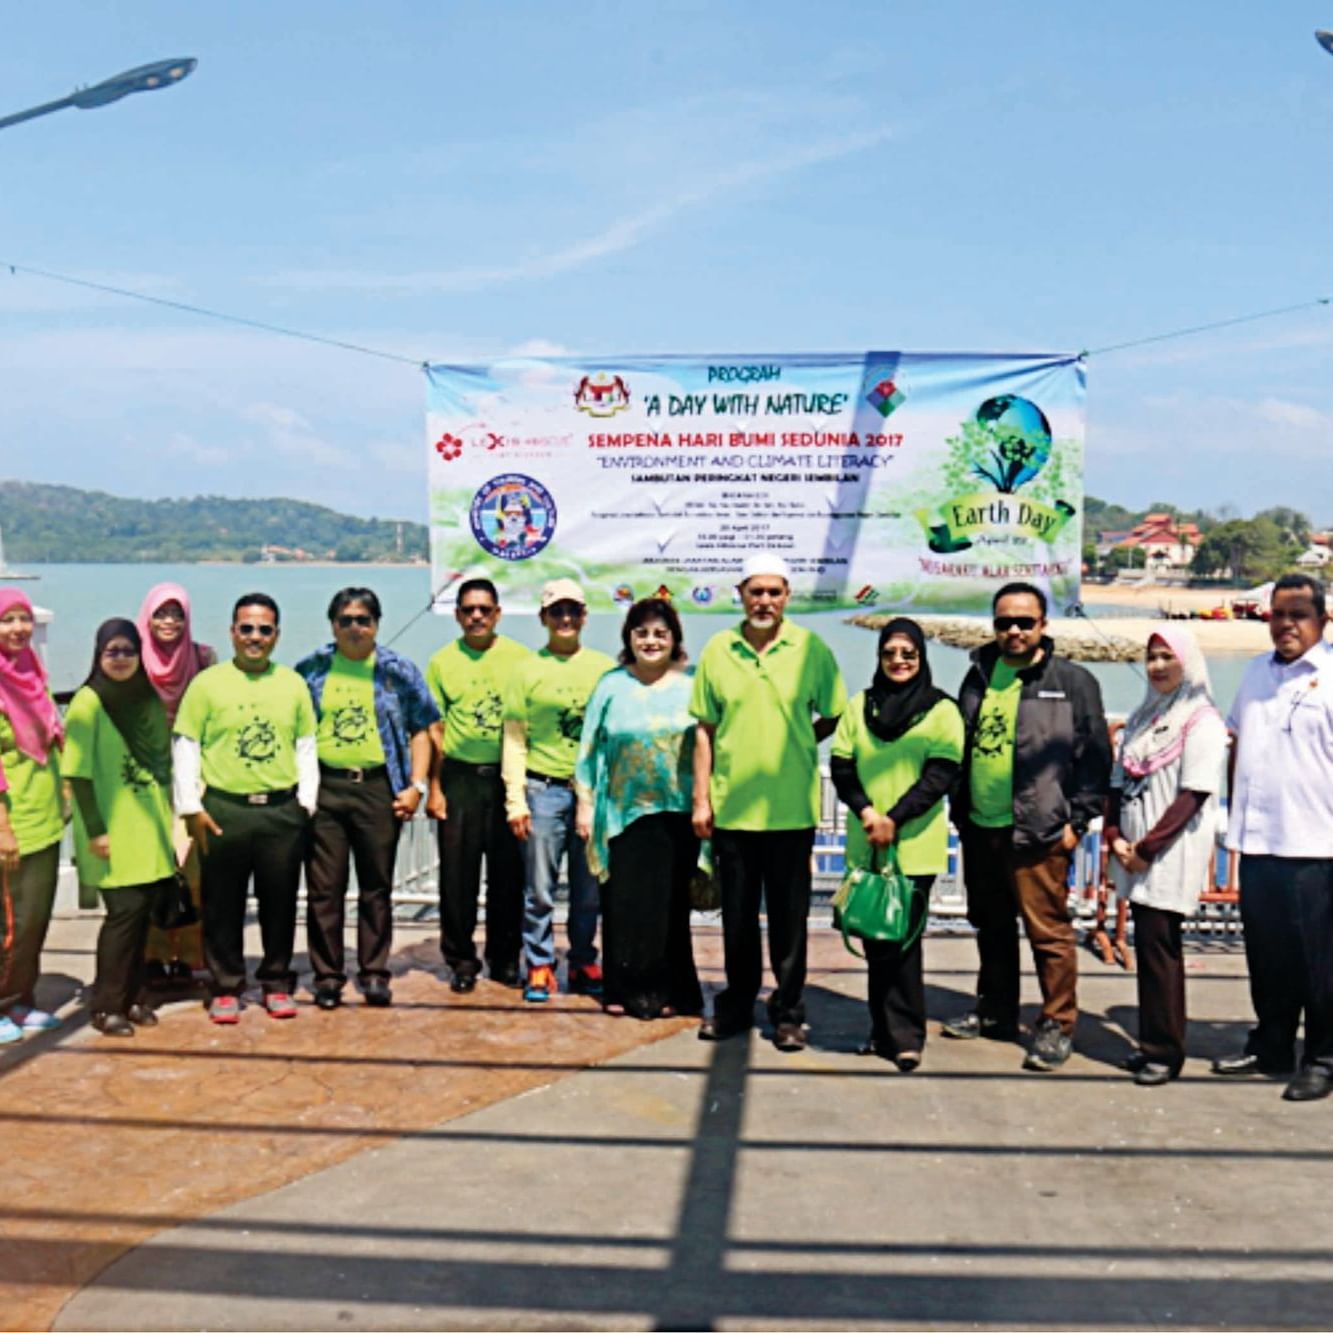 A Day With Nature – Collab With Jabatan Alam Sekitar Negeri Sembilan for Earth Day